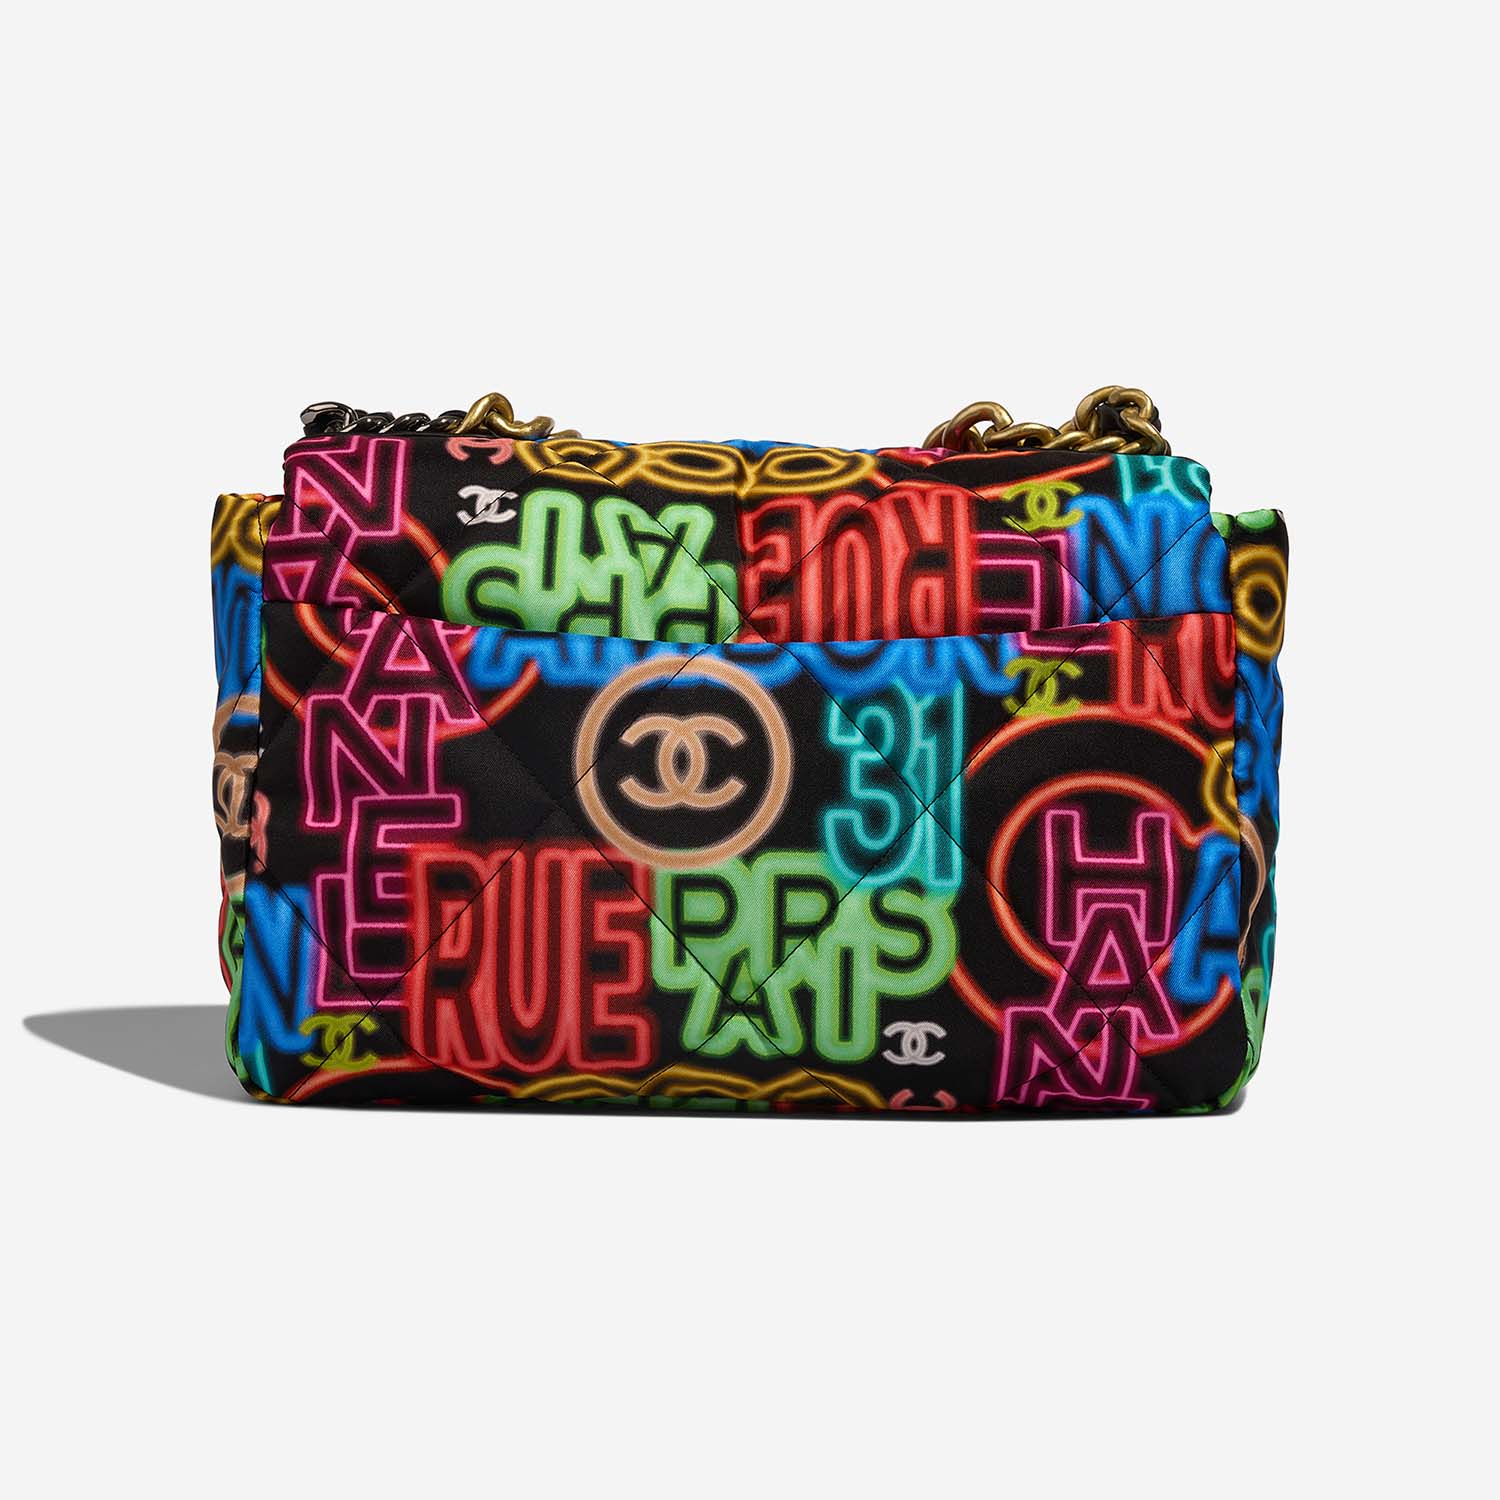 Chanel 19 Large Multicolour Back | Sell your designer bag on Saclab.com